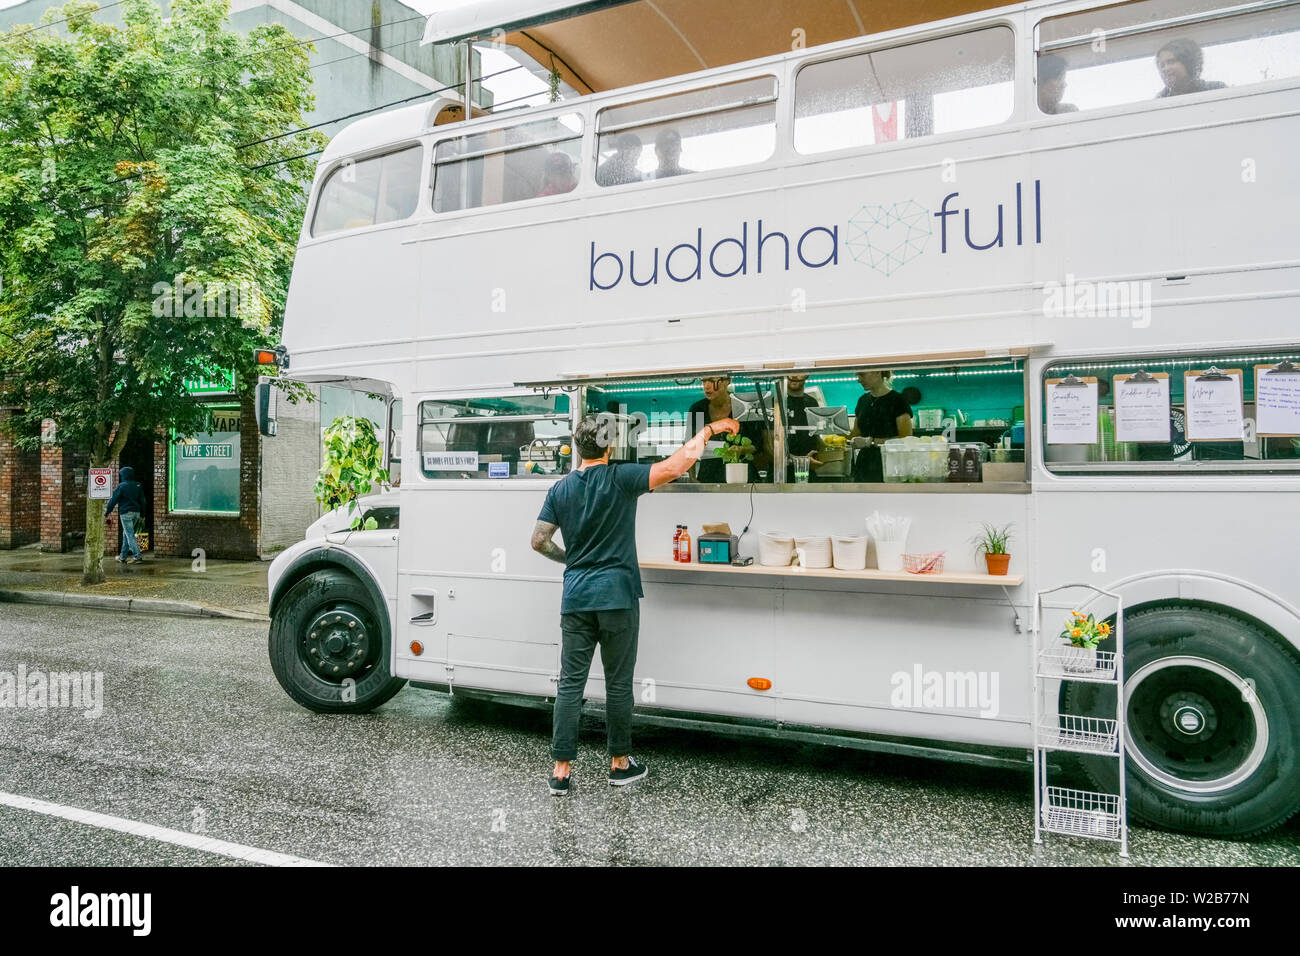 buddha full, double decker bus, food truck, Car Free Day, Commercial Drive, Vancouver, British Columbia, Canada Stock Photo